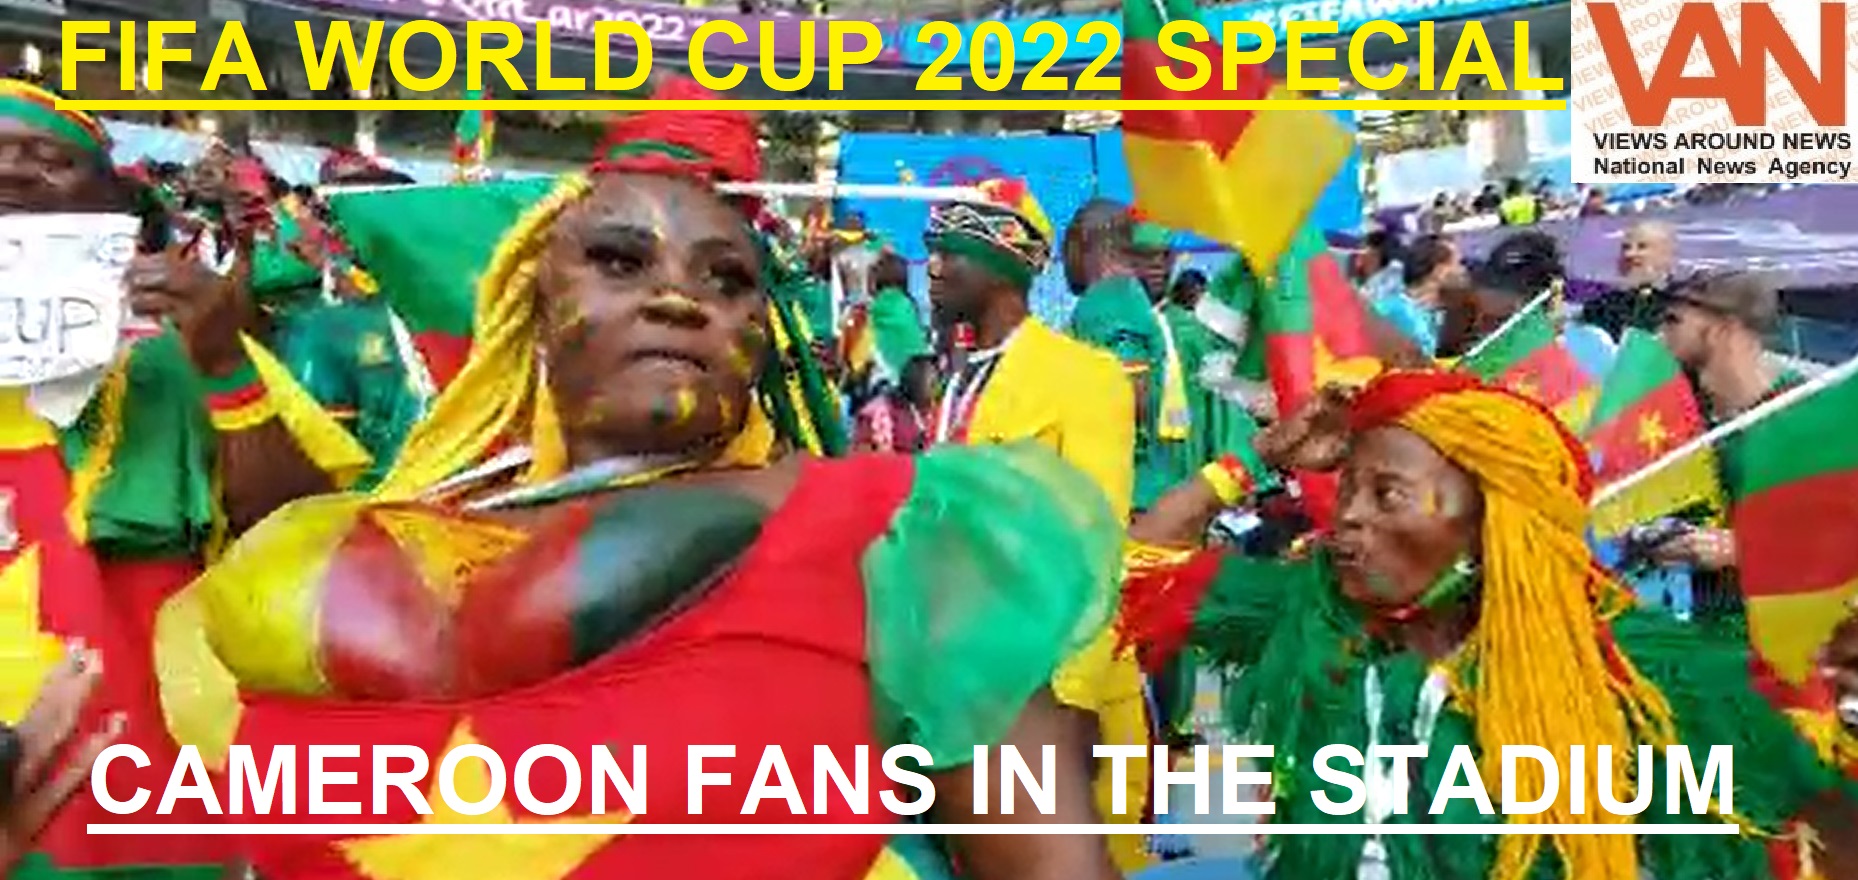 Cameroon Fans were excited in stands during FIFA W